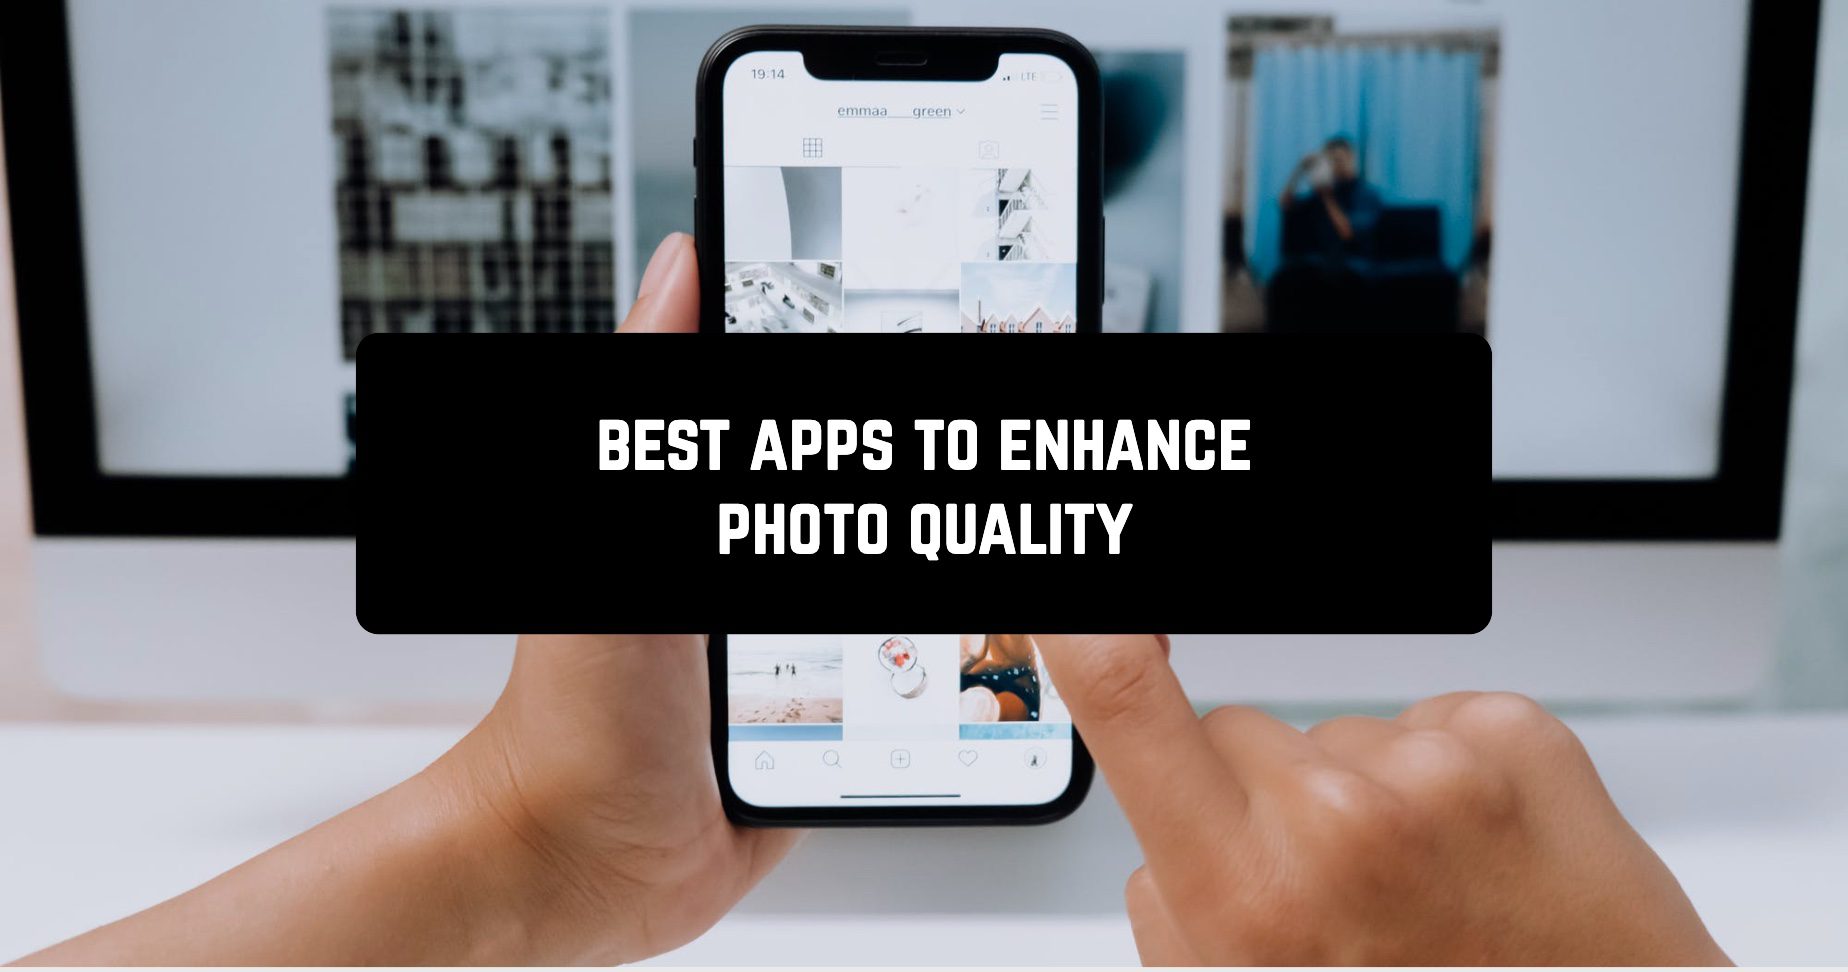 Best apps to enhance photo quality